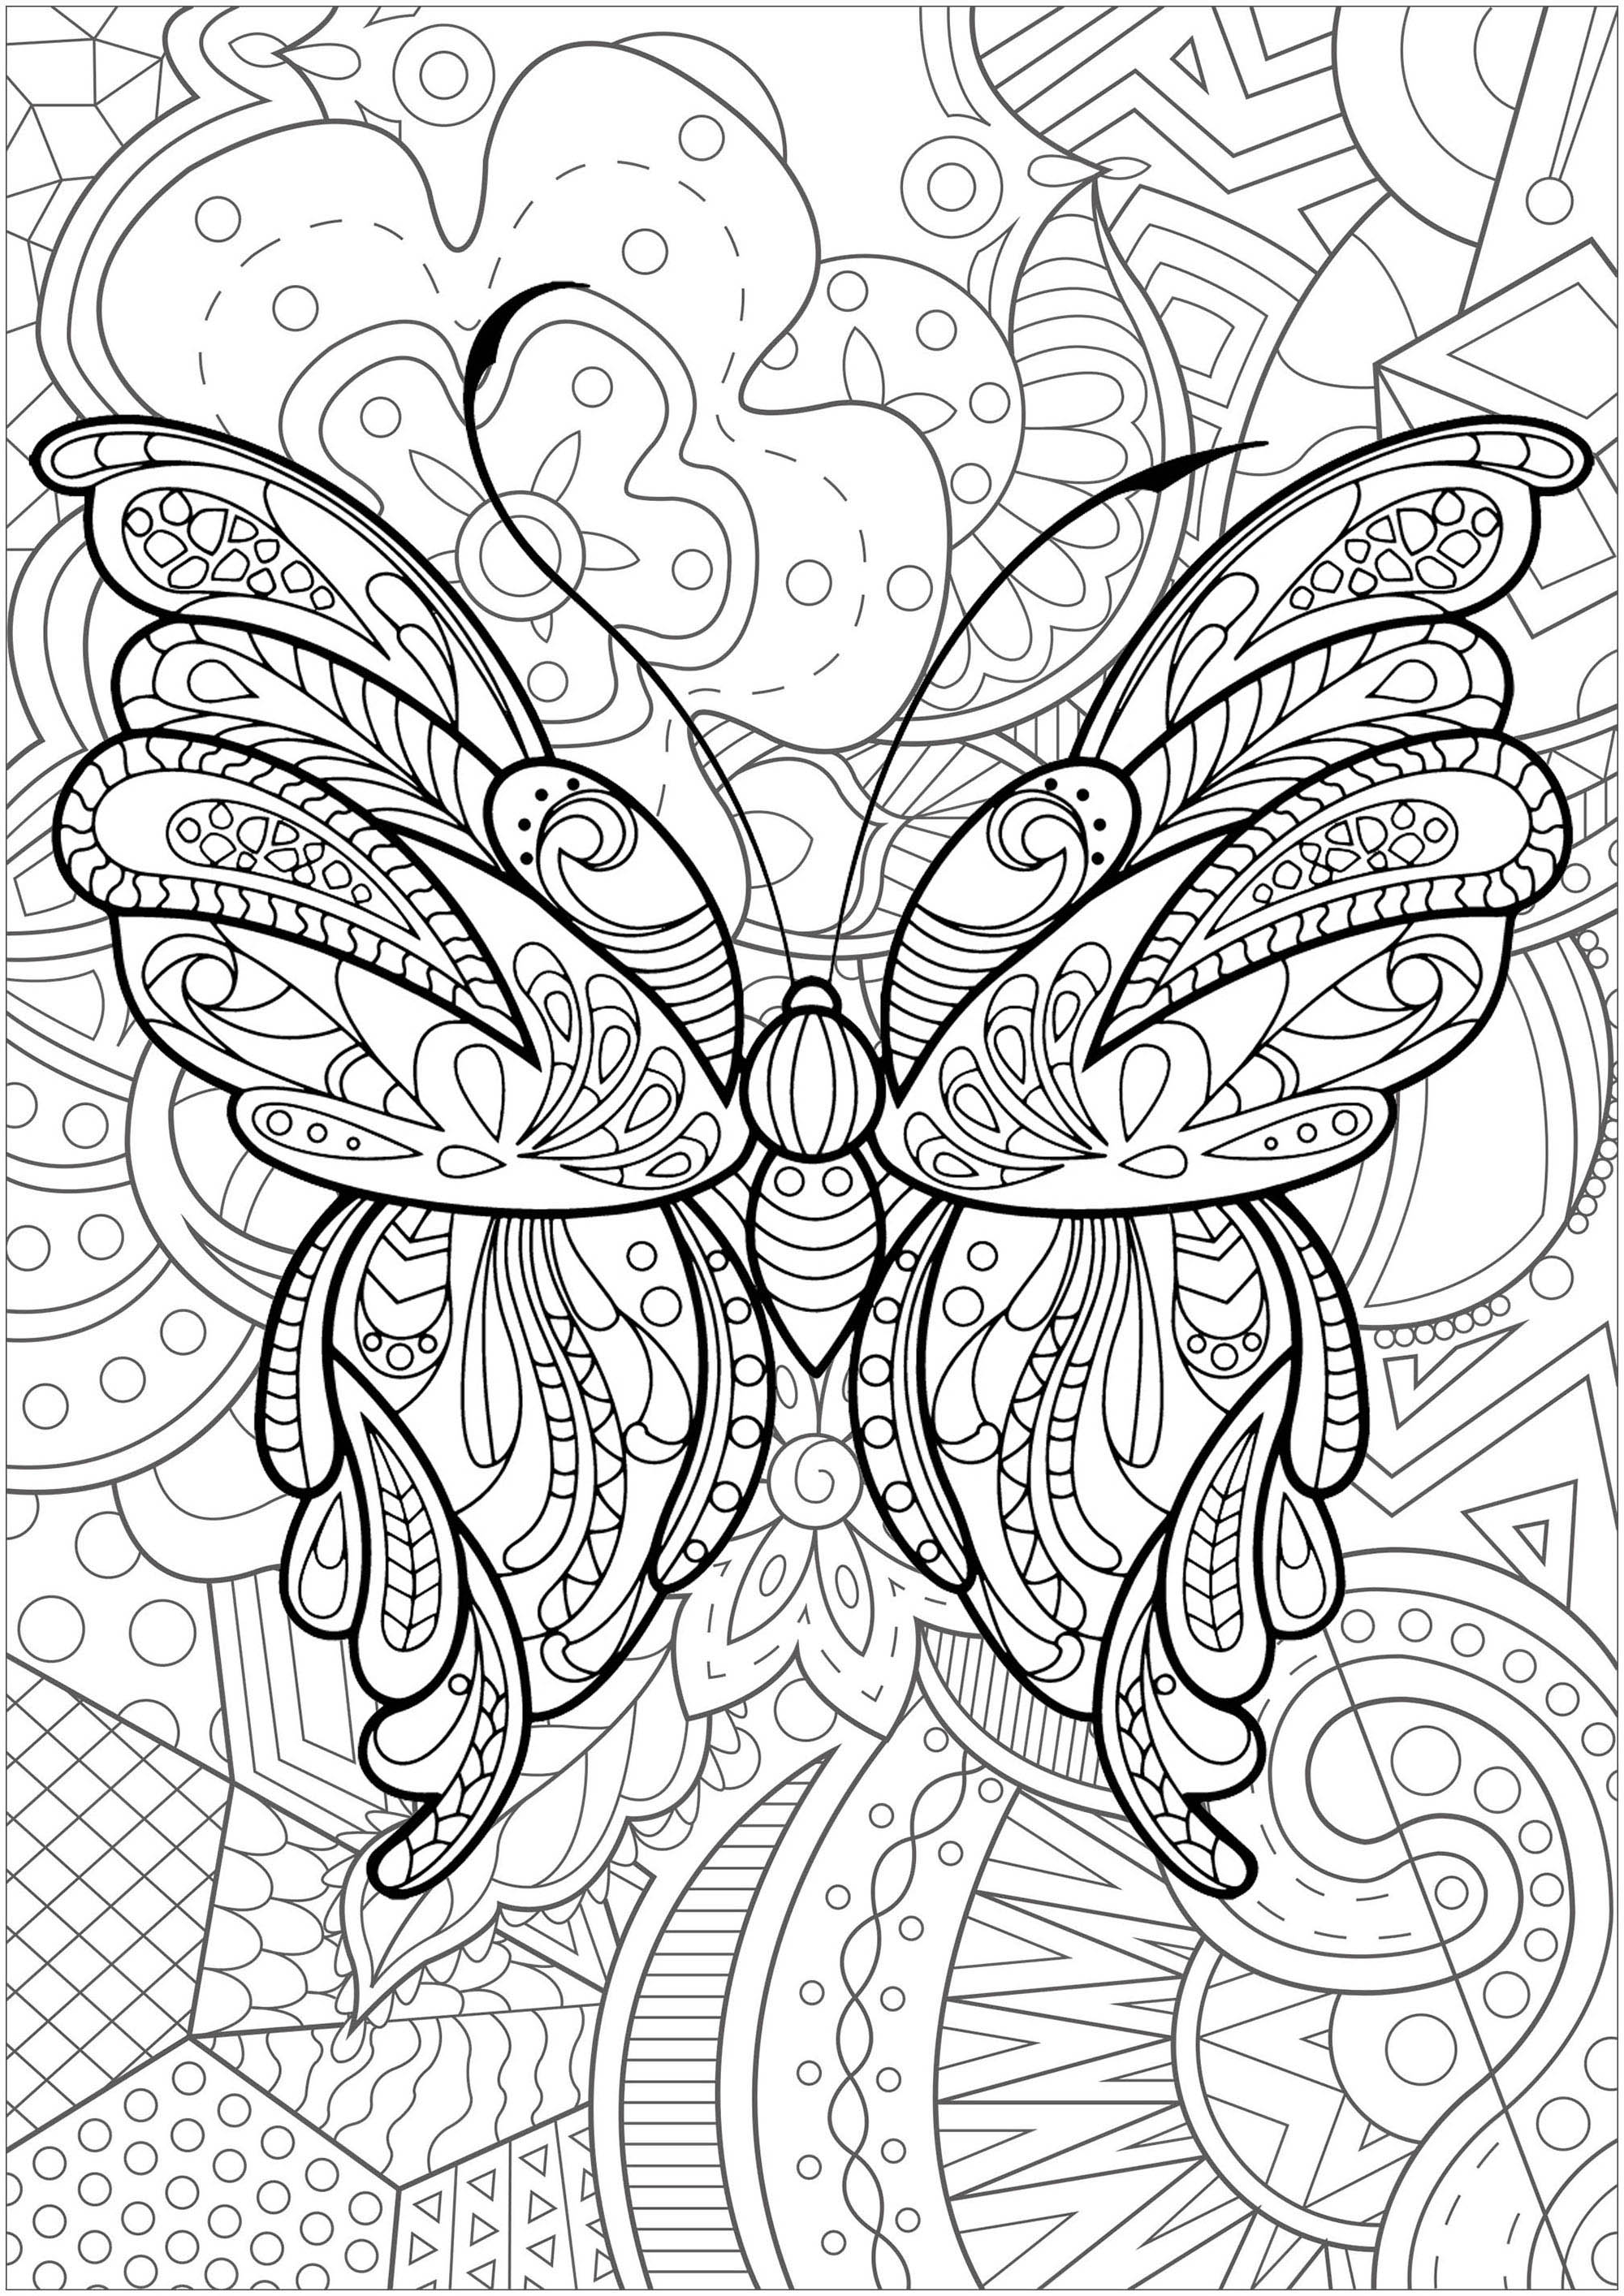 Butterfly with patterns inside and magnificent flowered background - 1, Artist : Art. Isabelle